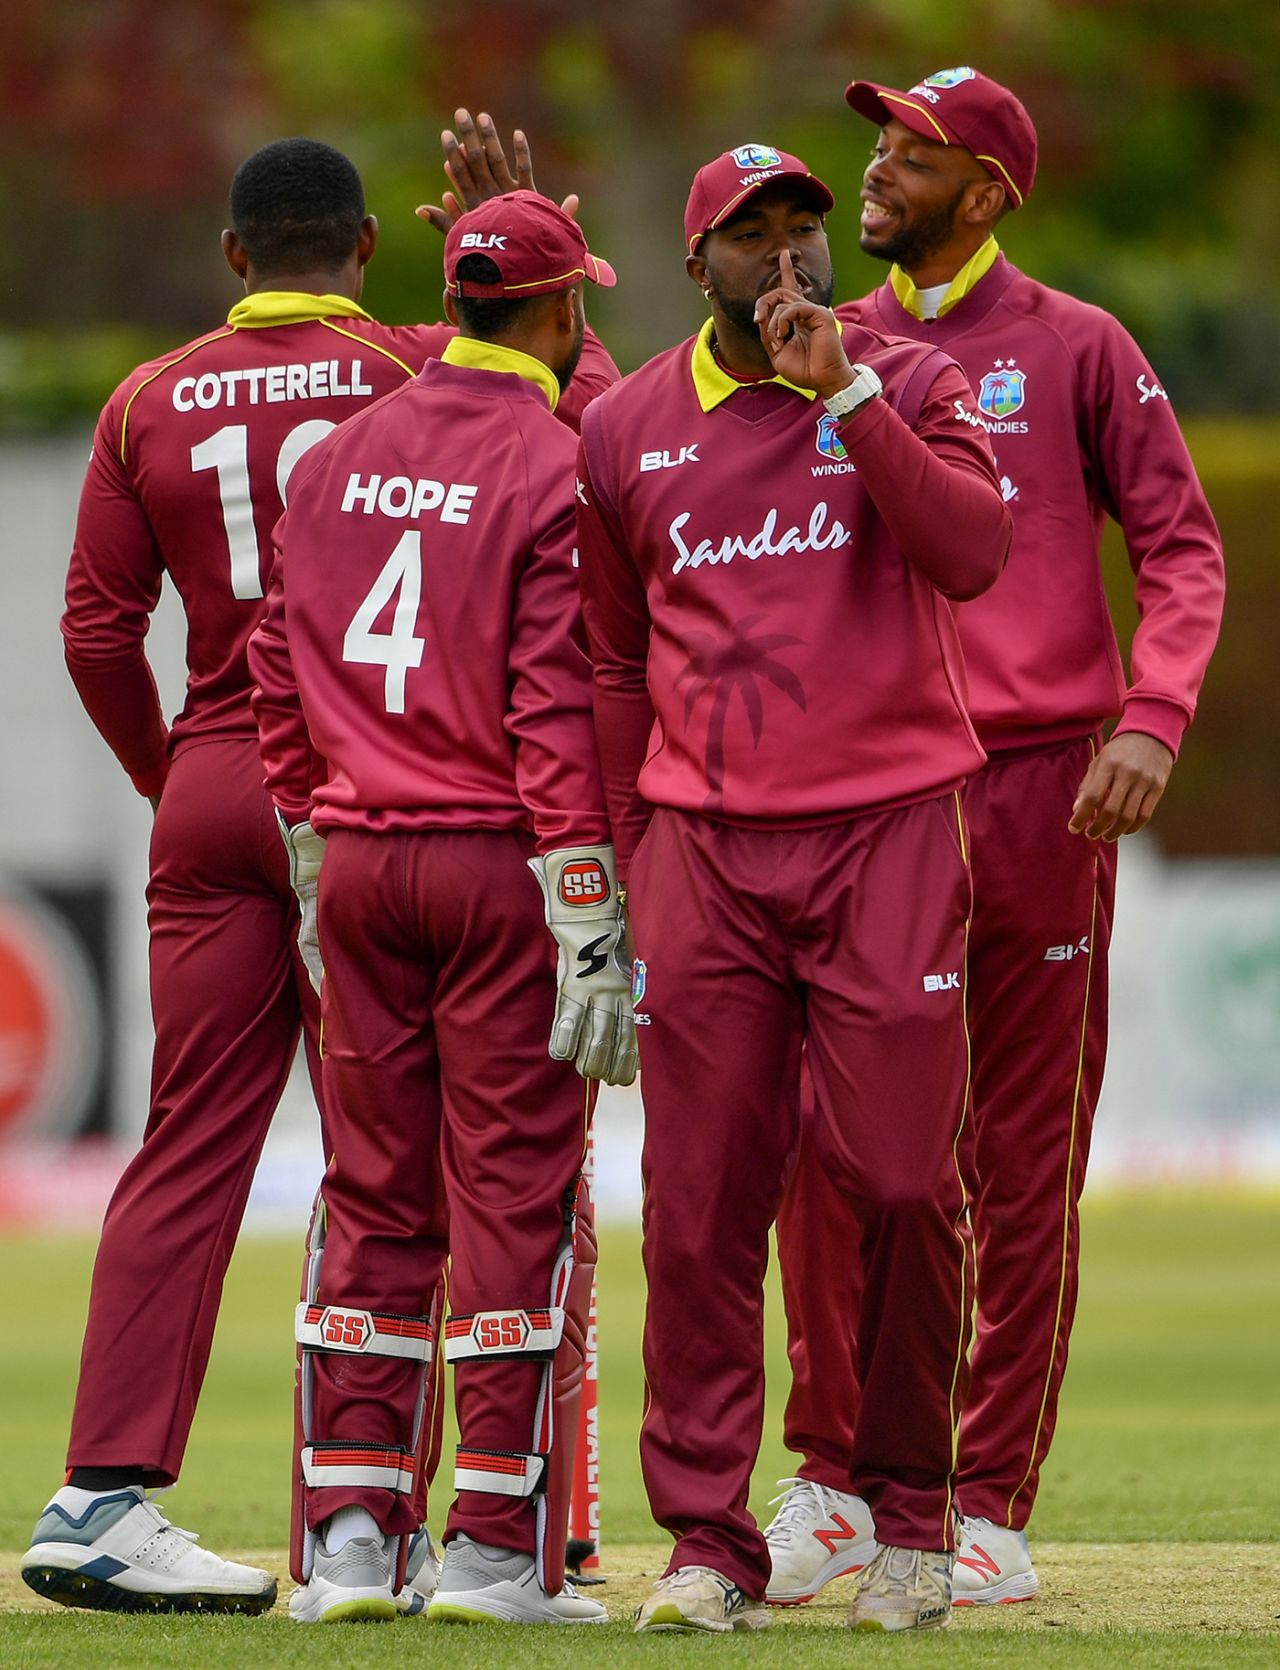 Ashley Nurse has a message for the dismissed batsman, Ireland v West Indies, Ireland Tri-Nation Series, Dublin, May 5, 2019